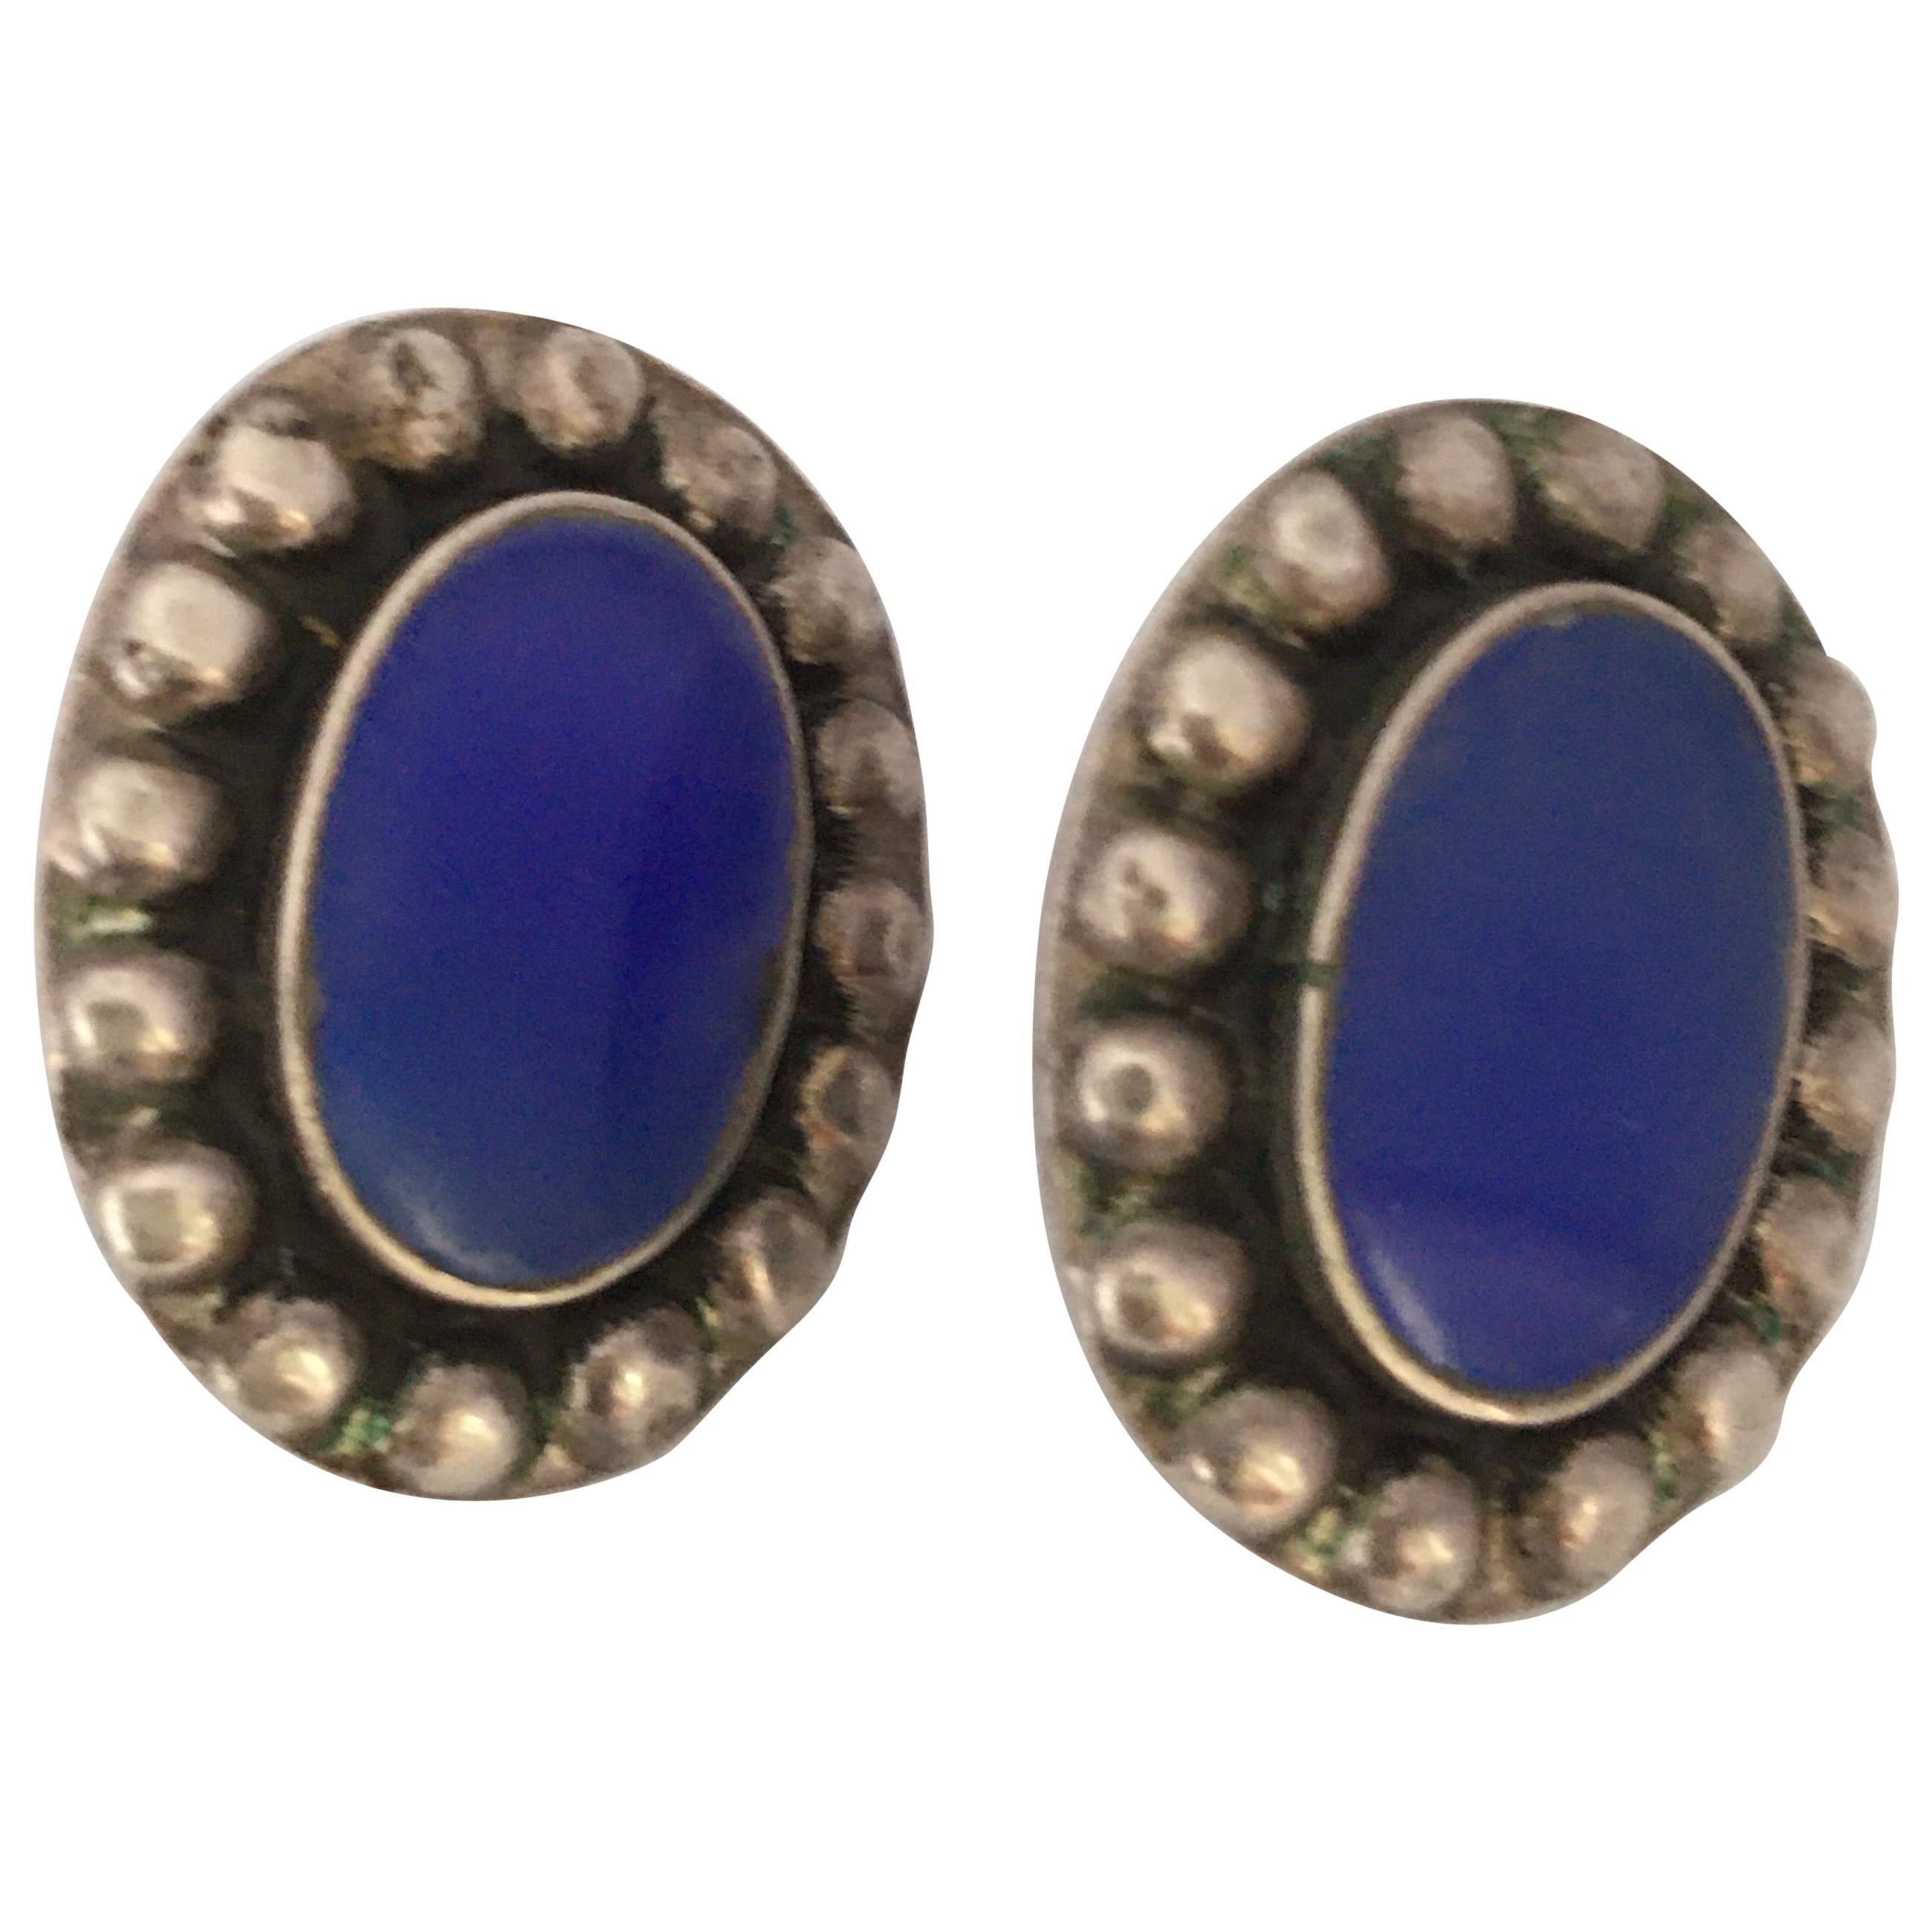 Vintage 925 Silver Pair of Earrings with Blue Agate For Sale